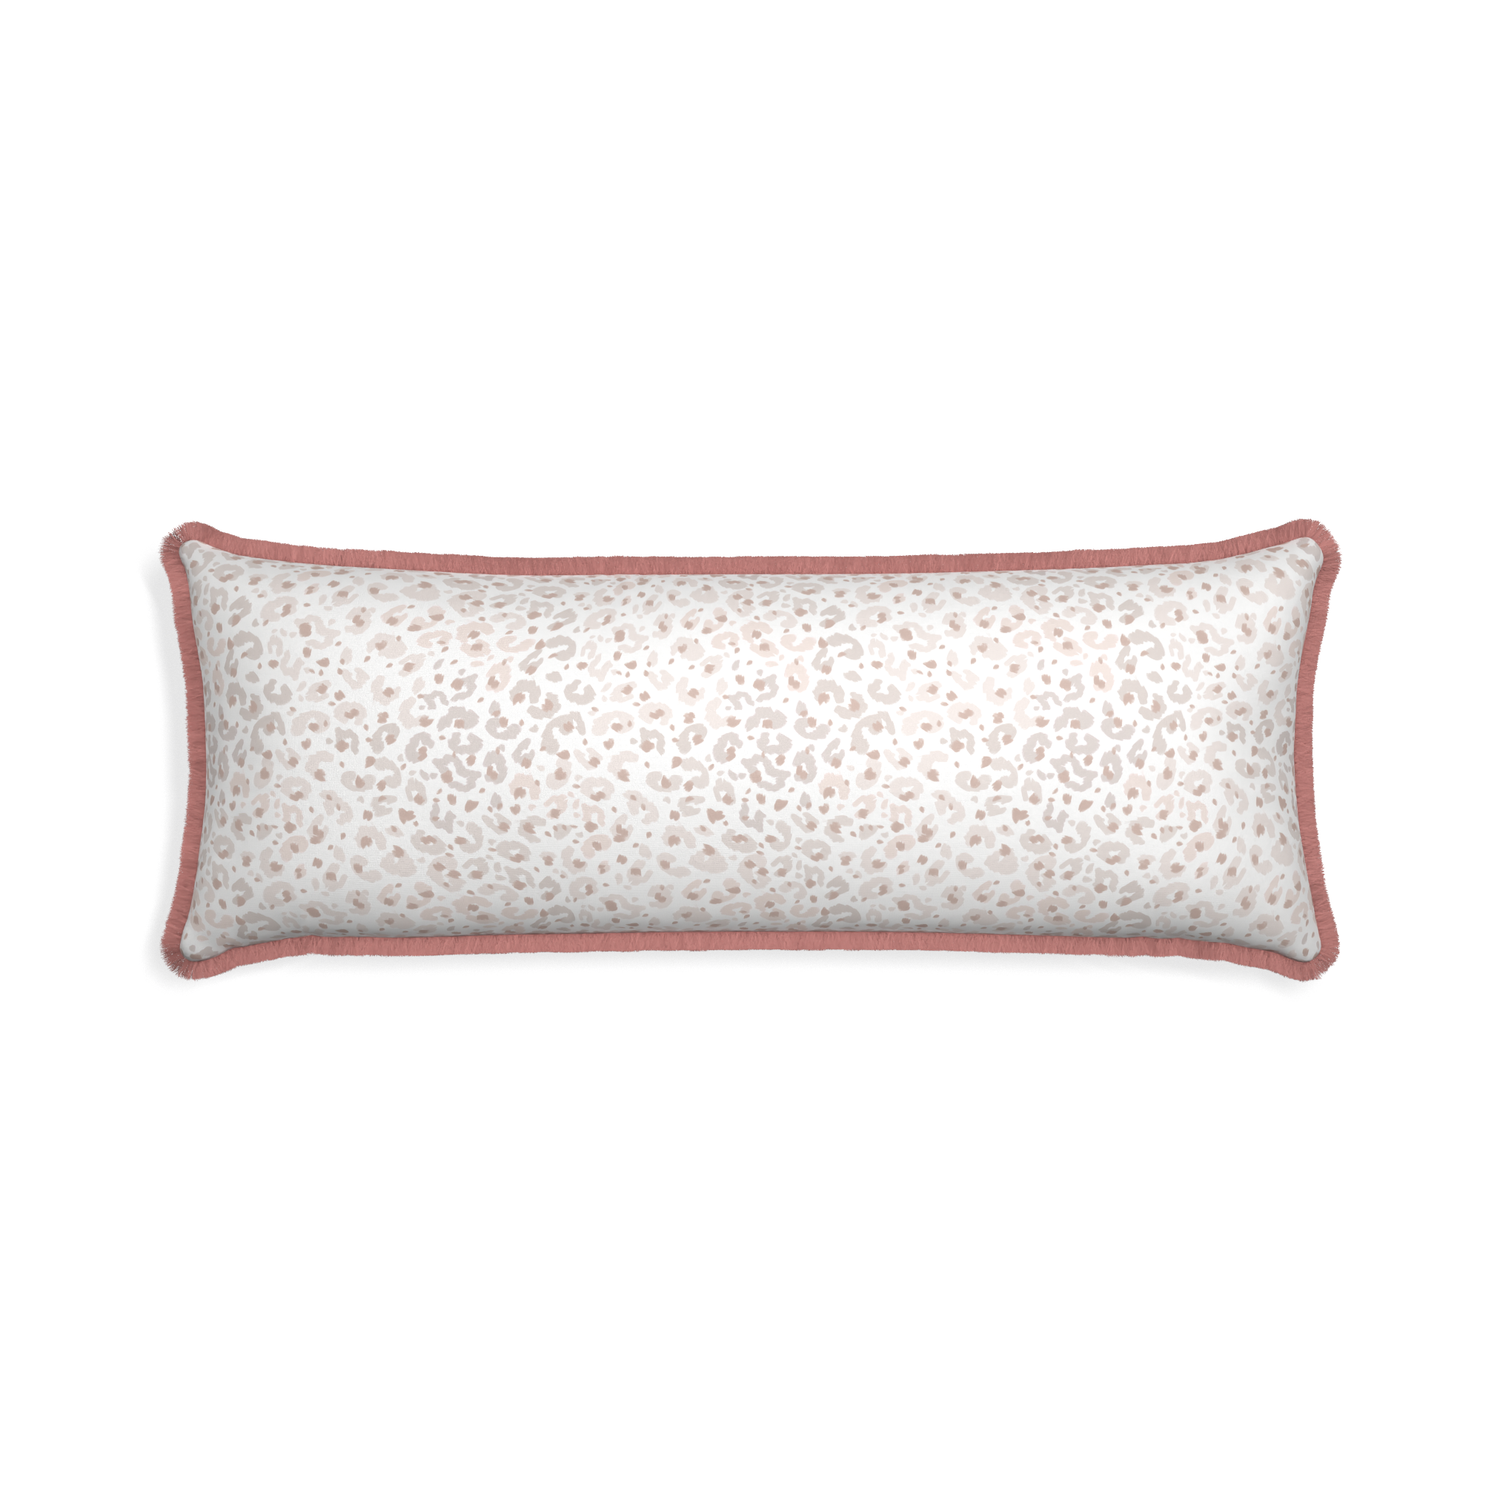 Xl-lumbar rosie custom pillow with d fringe on white background